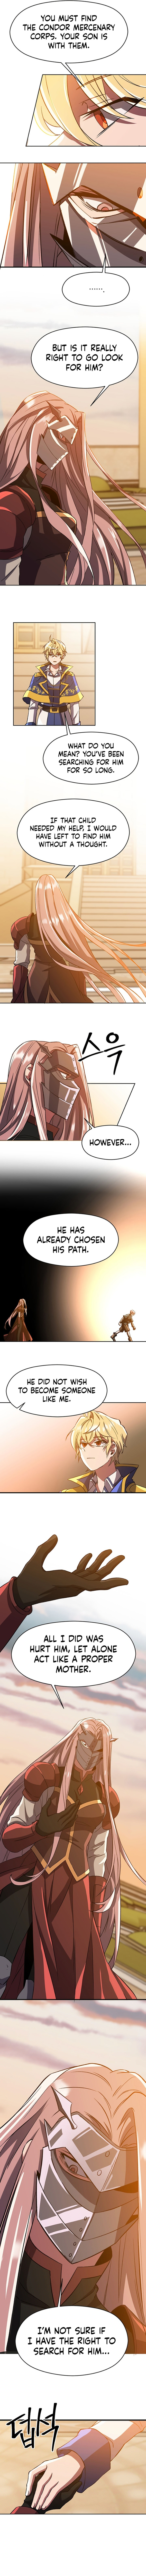 Archmage Transcending Through Regression - Chapter 34 Page 6